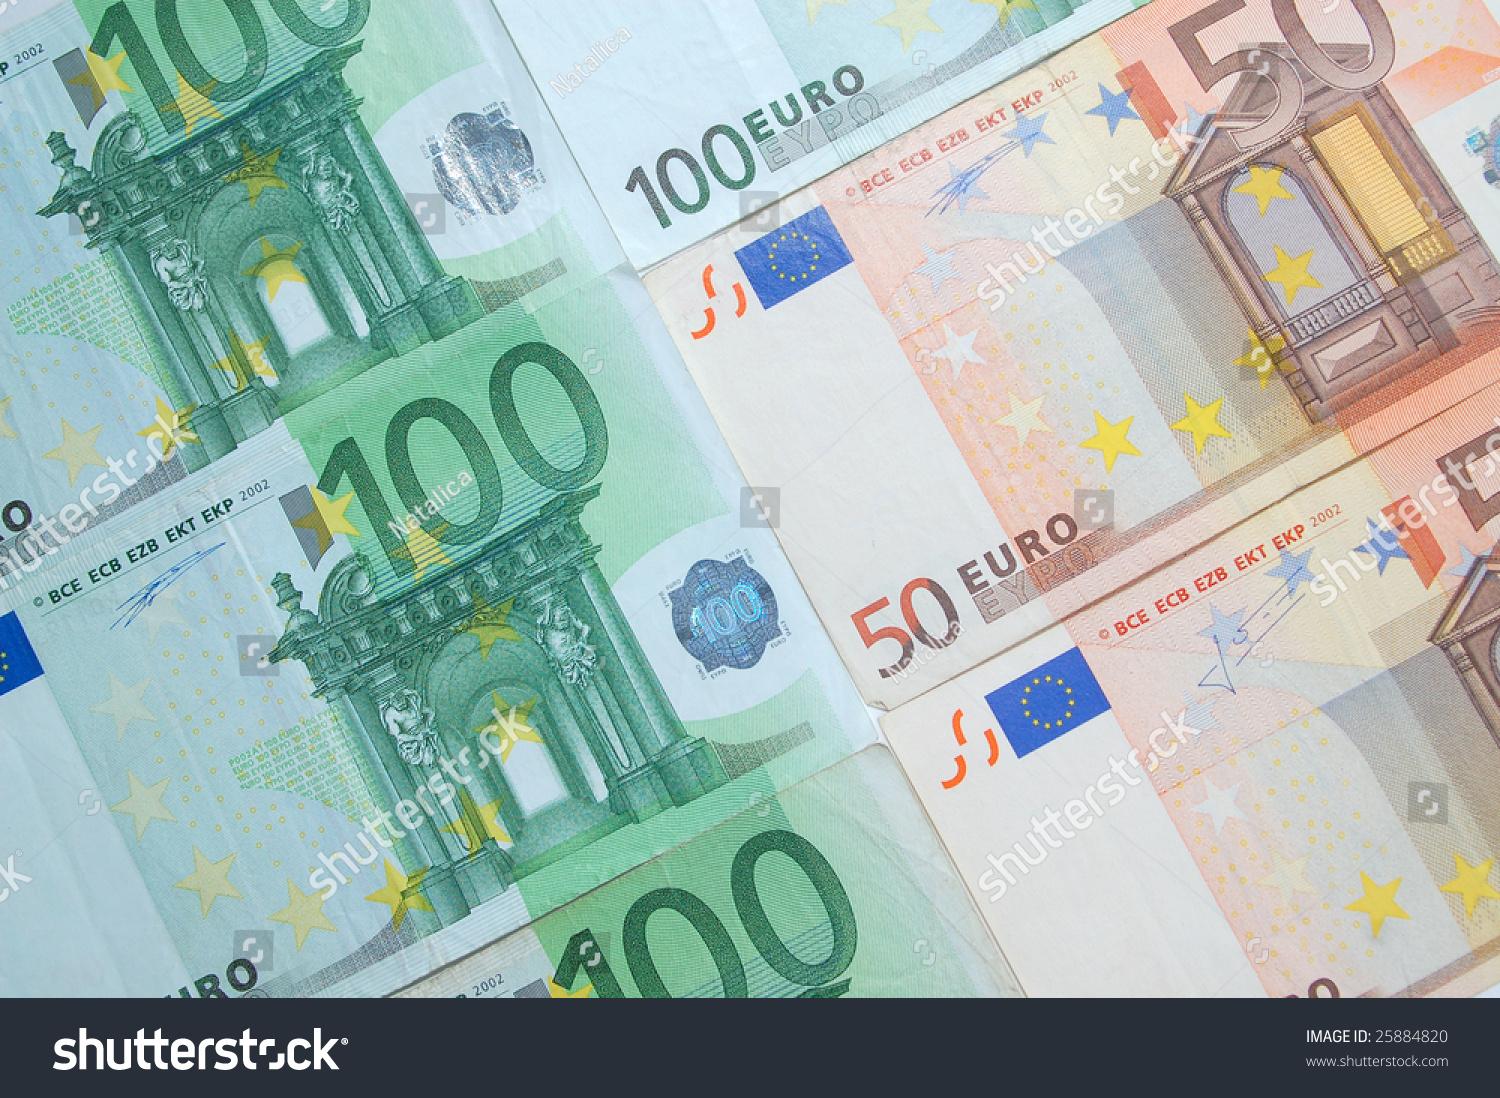 A Lot Of Money (Euro Bank-Notes) Stock Photo 25884820 : Shutterstock